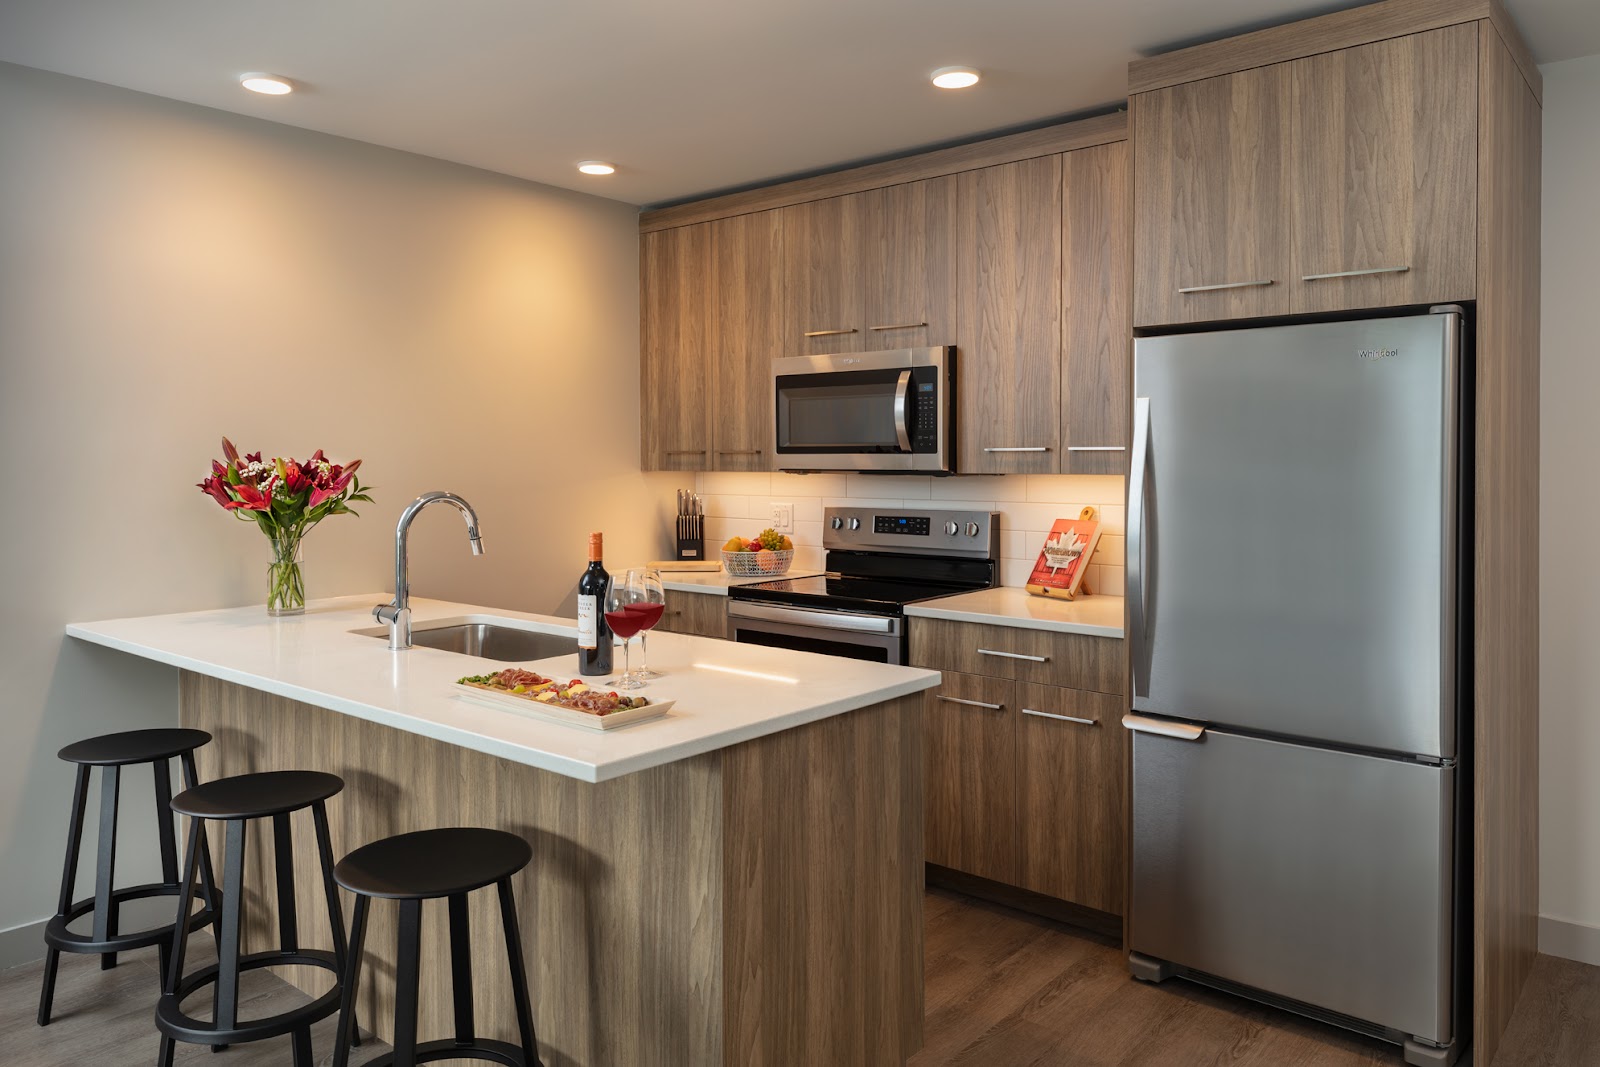 a suite kitchen at The Shore, furnished with modern appliances and space to cook groceries